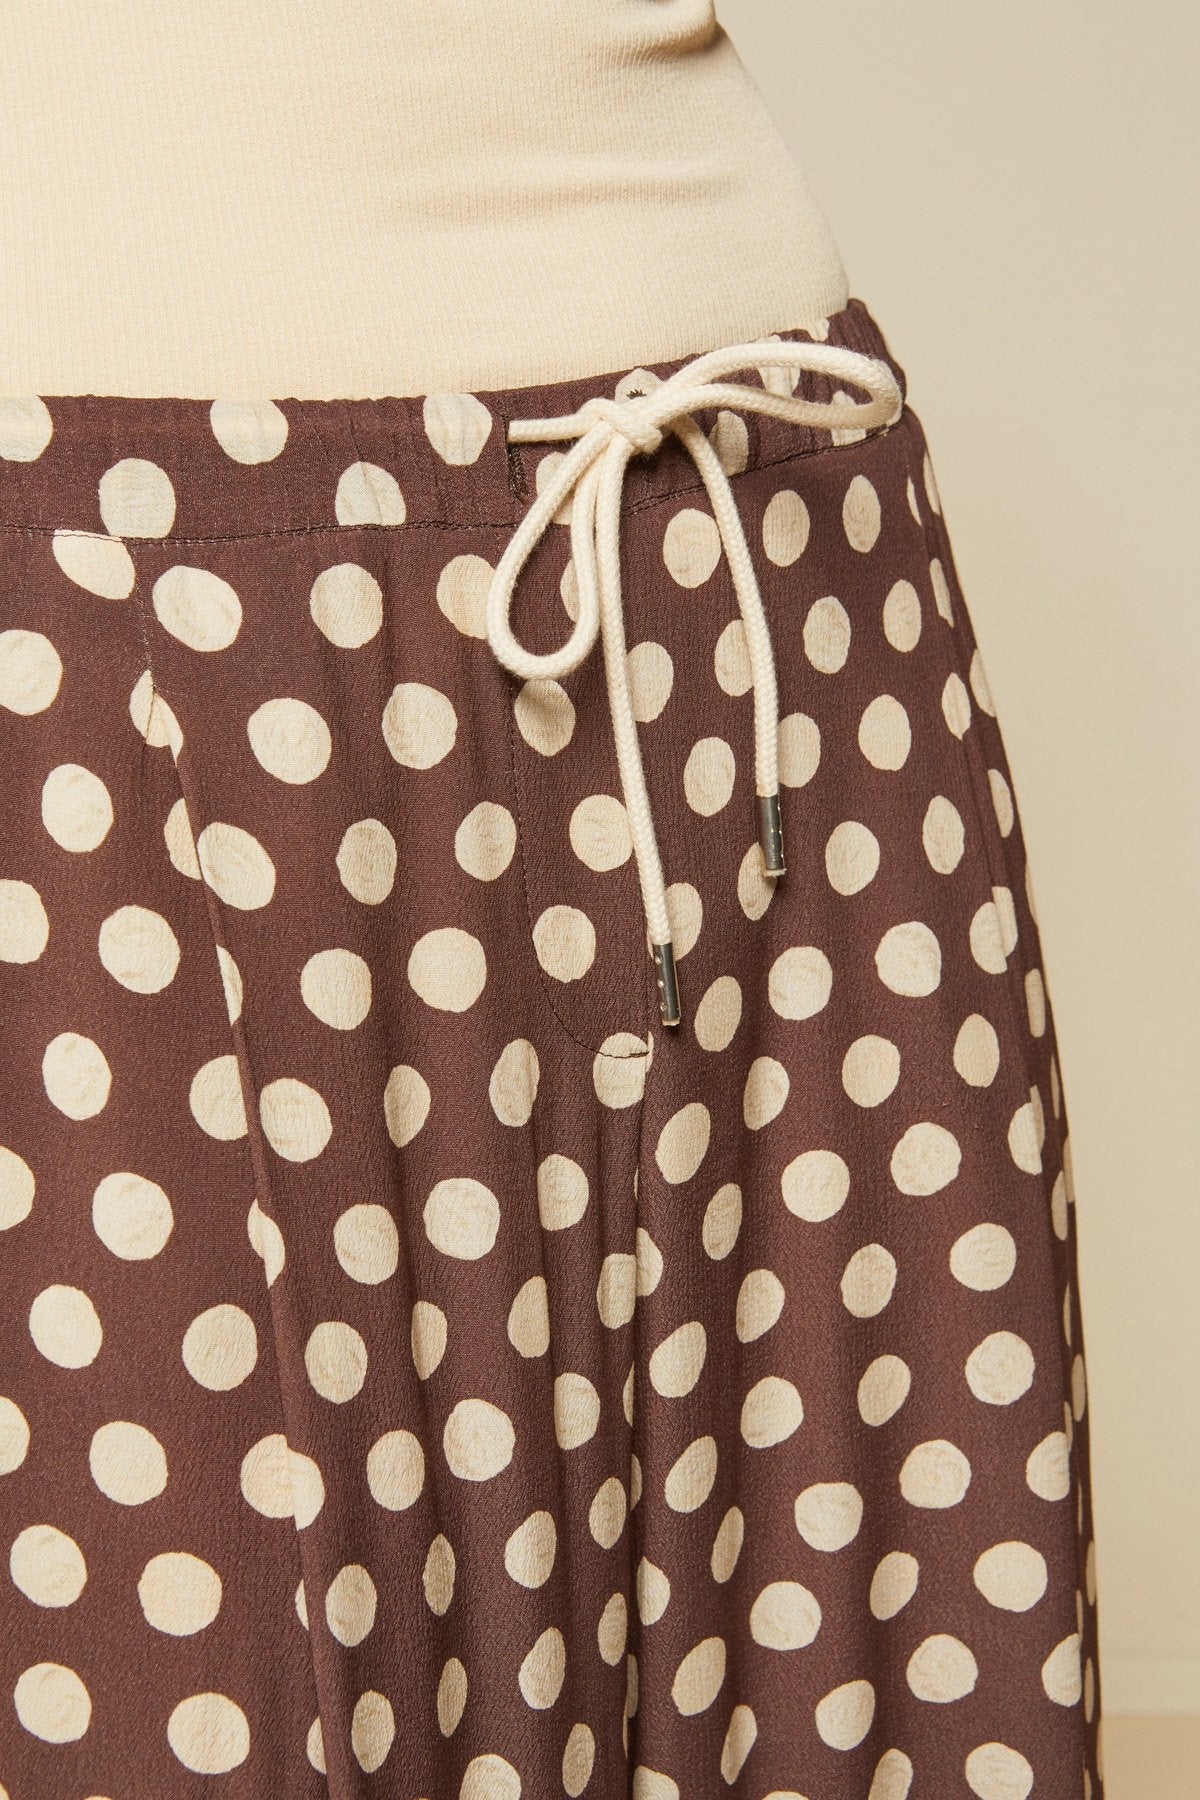 Ottod'Ame Polka Dots' Culottes Trousers